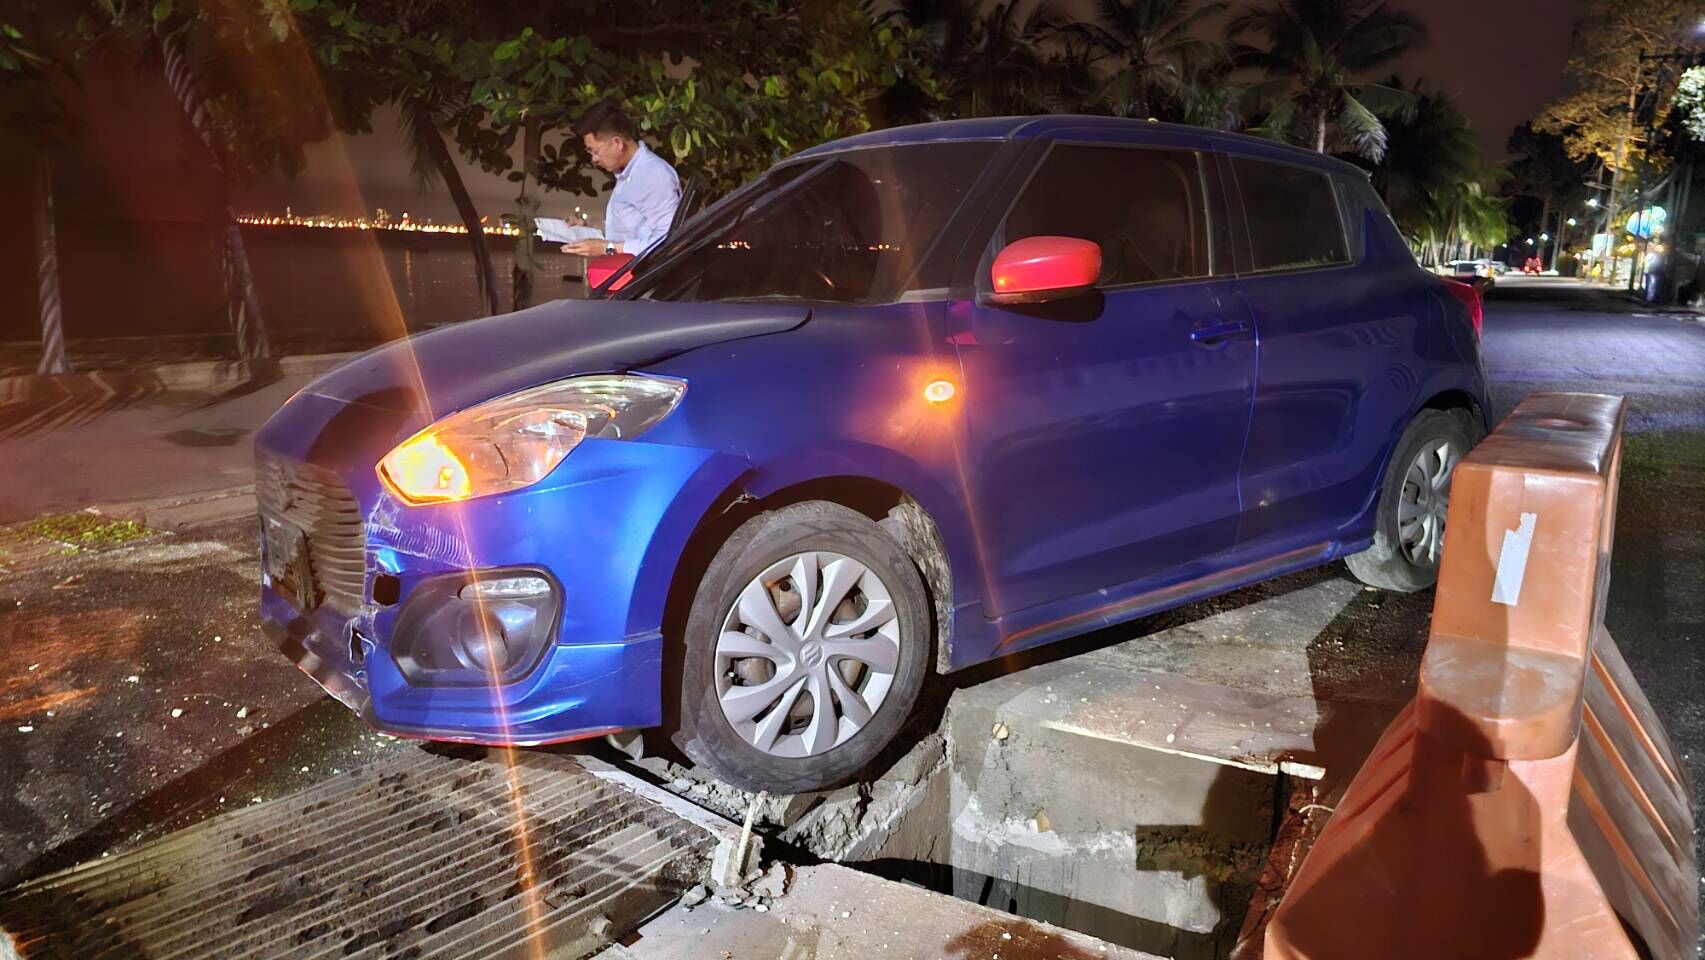 Tourist's car wheel trapped in poorly covered sewer hole in Sattahip | News by Thaiger